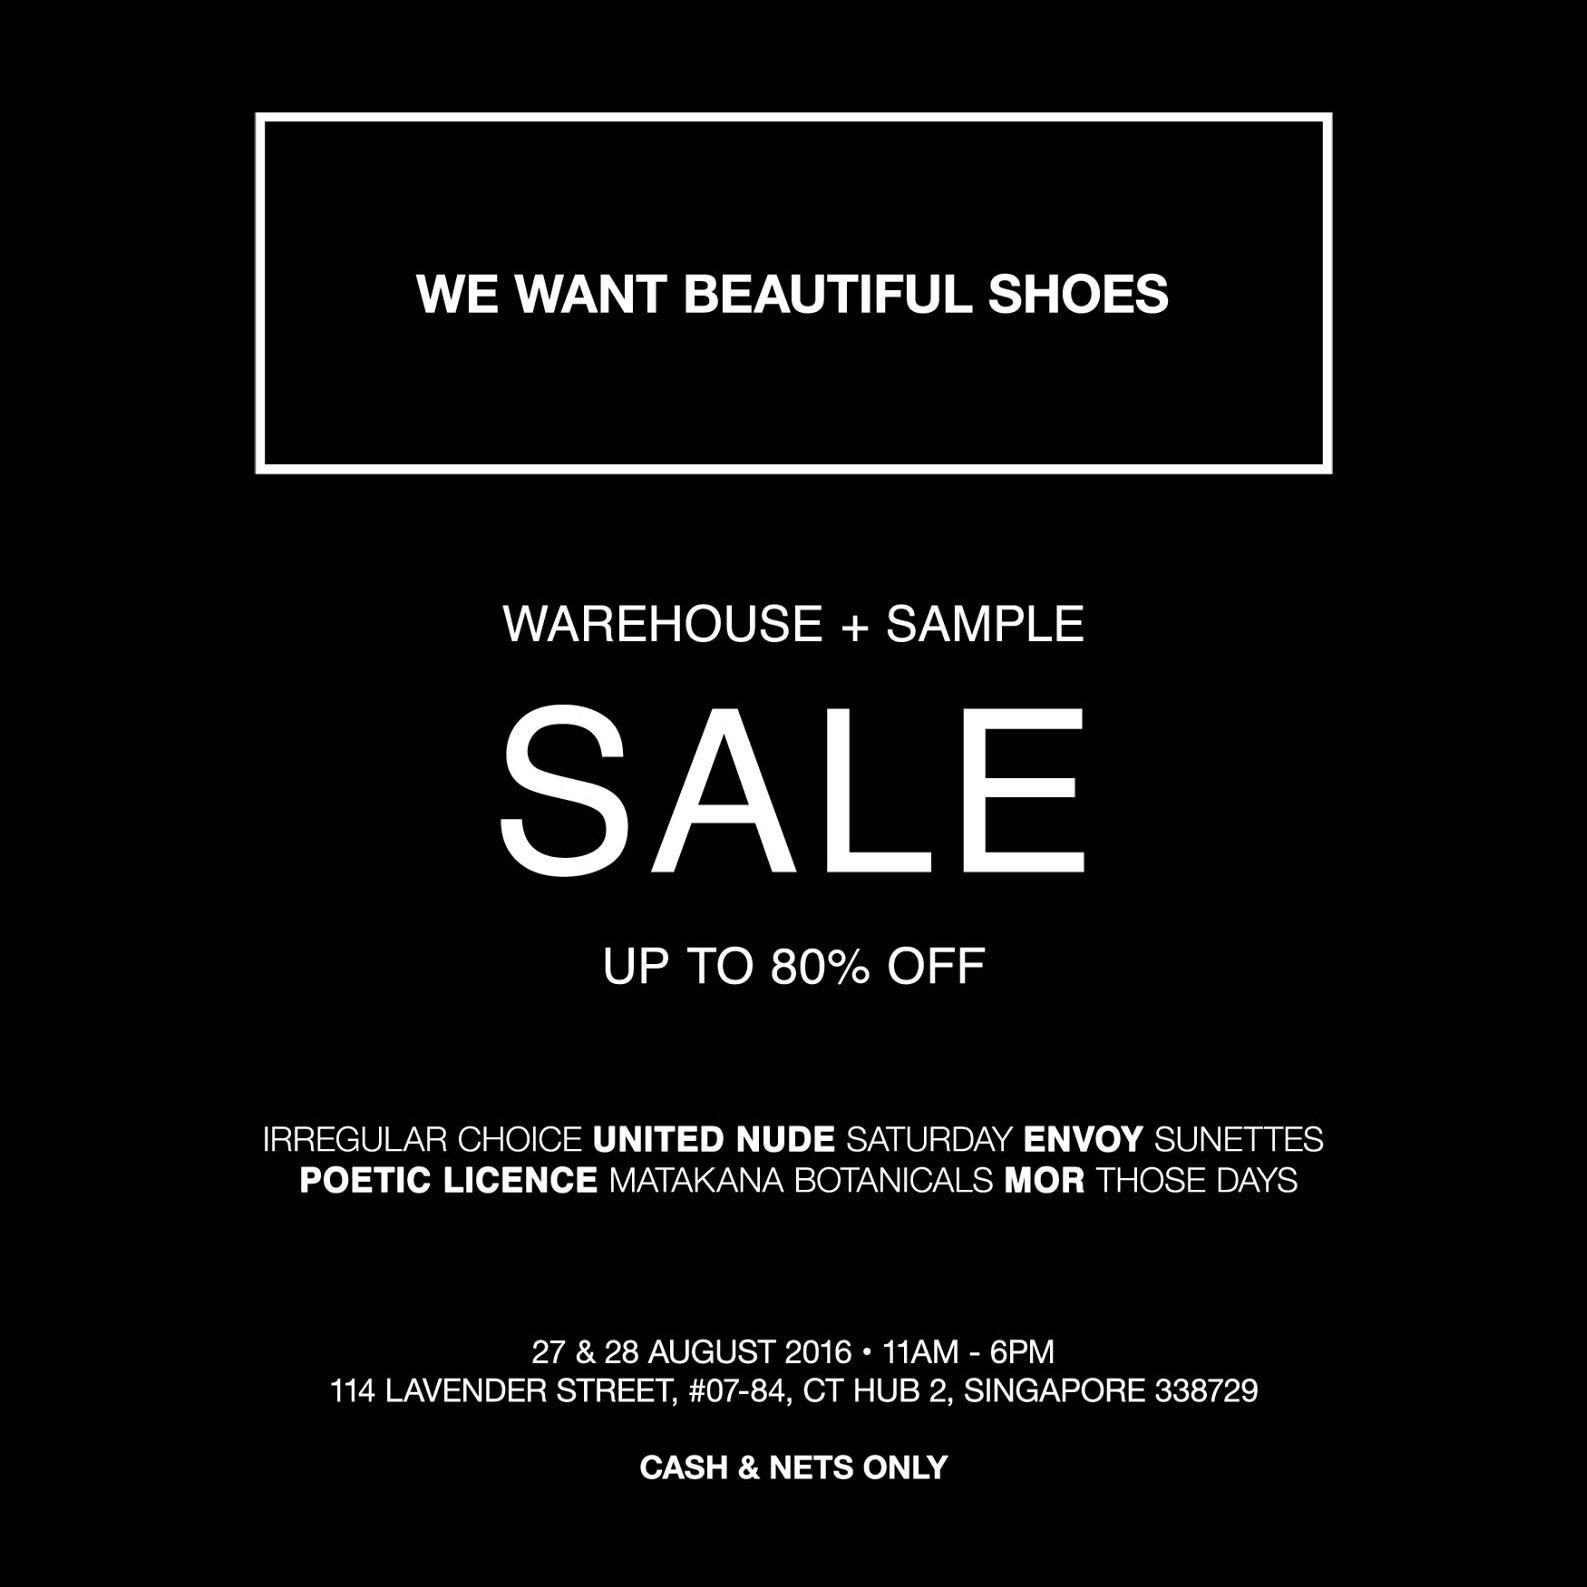 WEARTO Singapore Warehouse Sale Up to 80% Off Promotion 27 to 28 Aug 2016